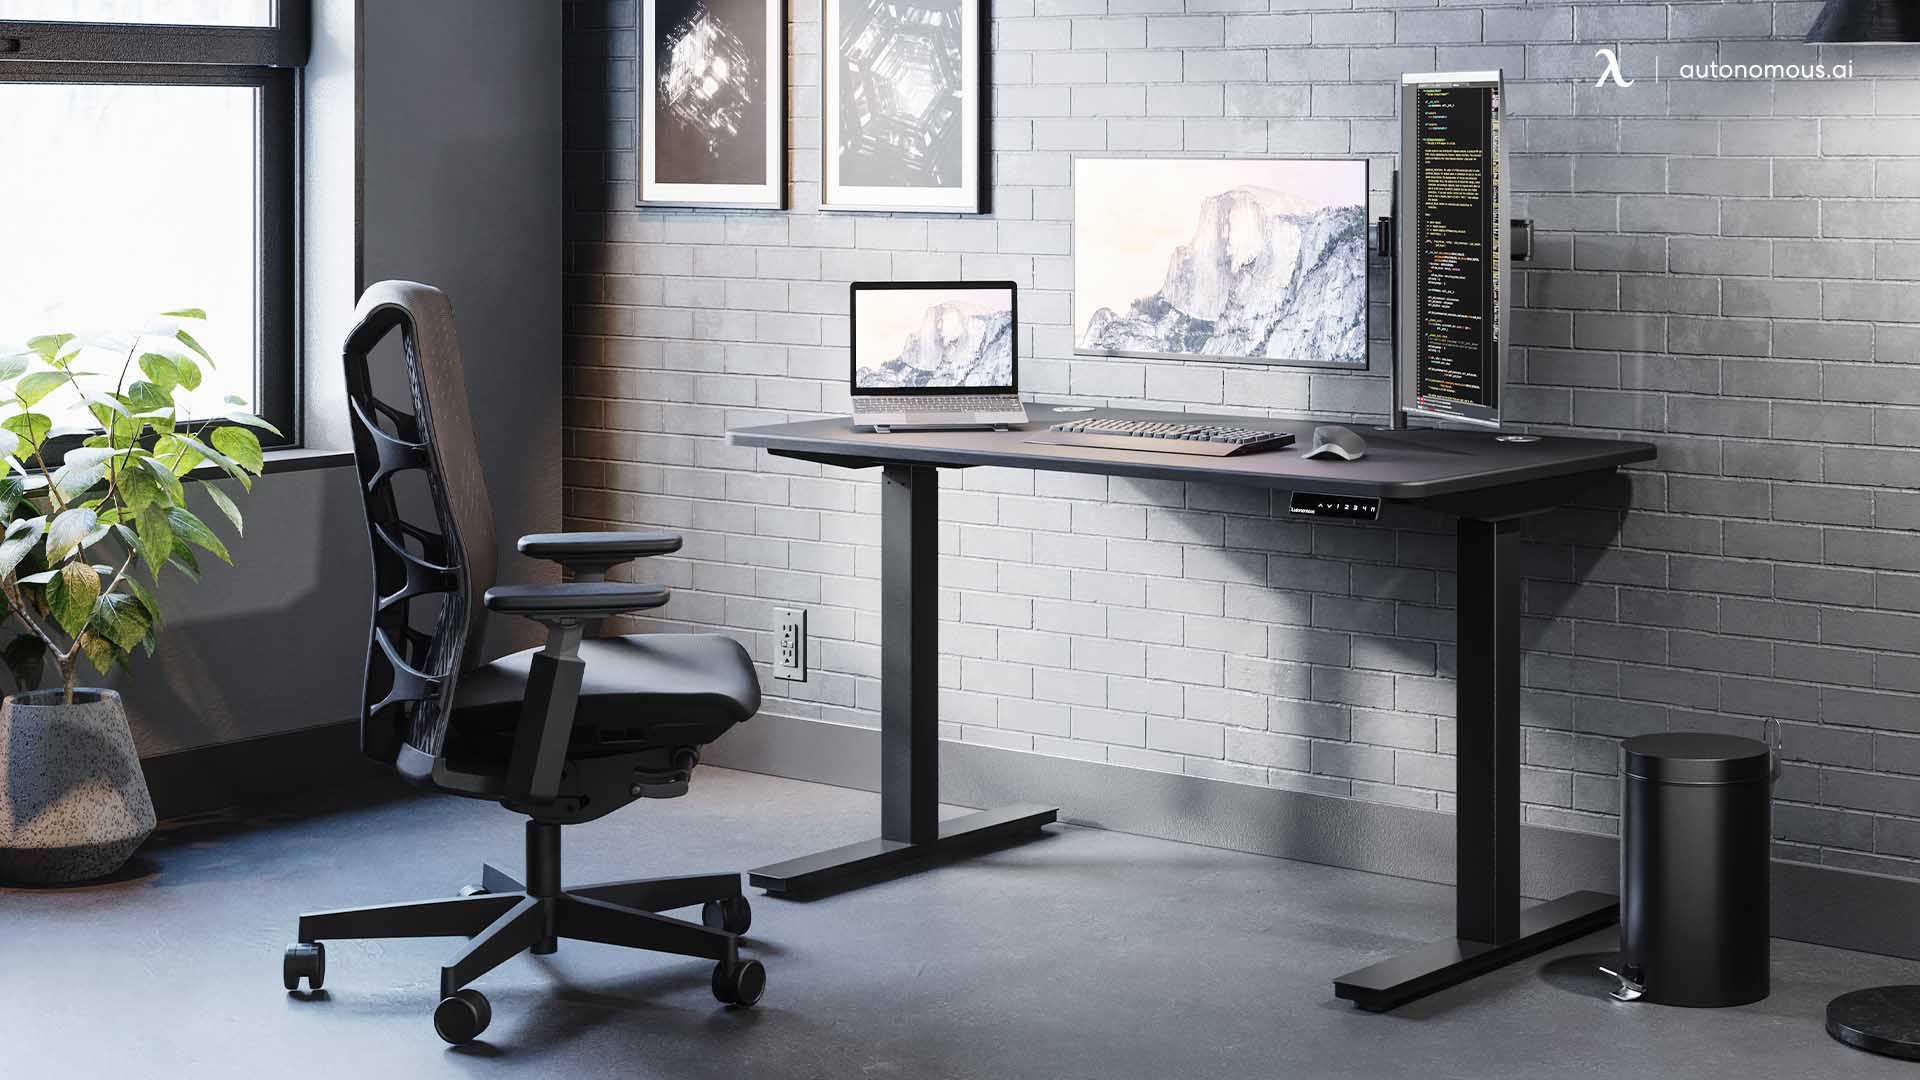 SmartDesk Pro gaming chair and table